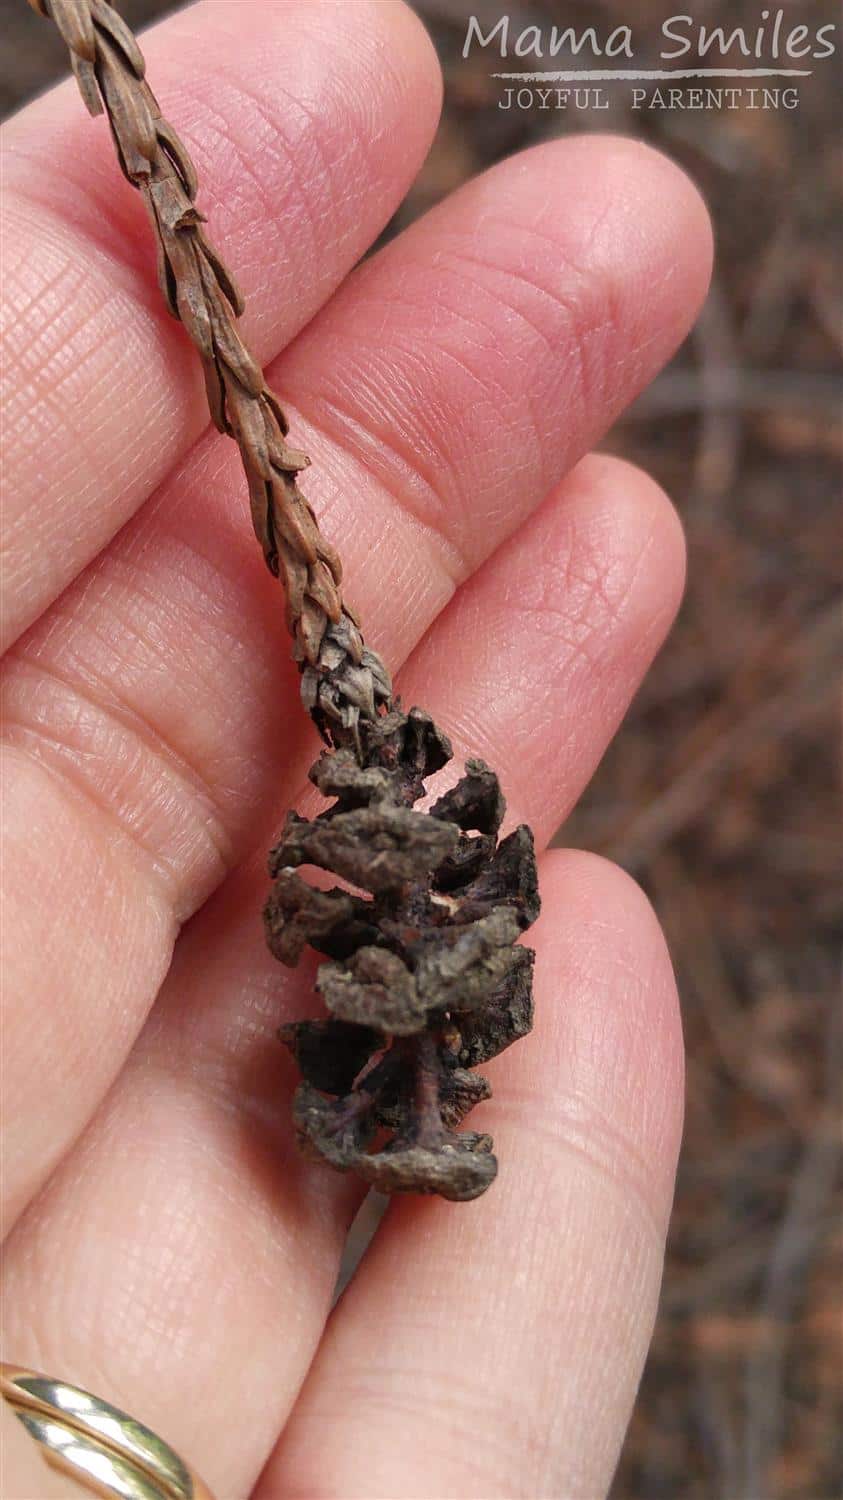 Can you believe that California redwood tree pinecones are this tiny??